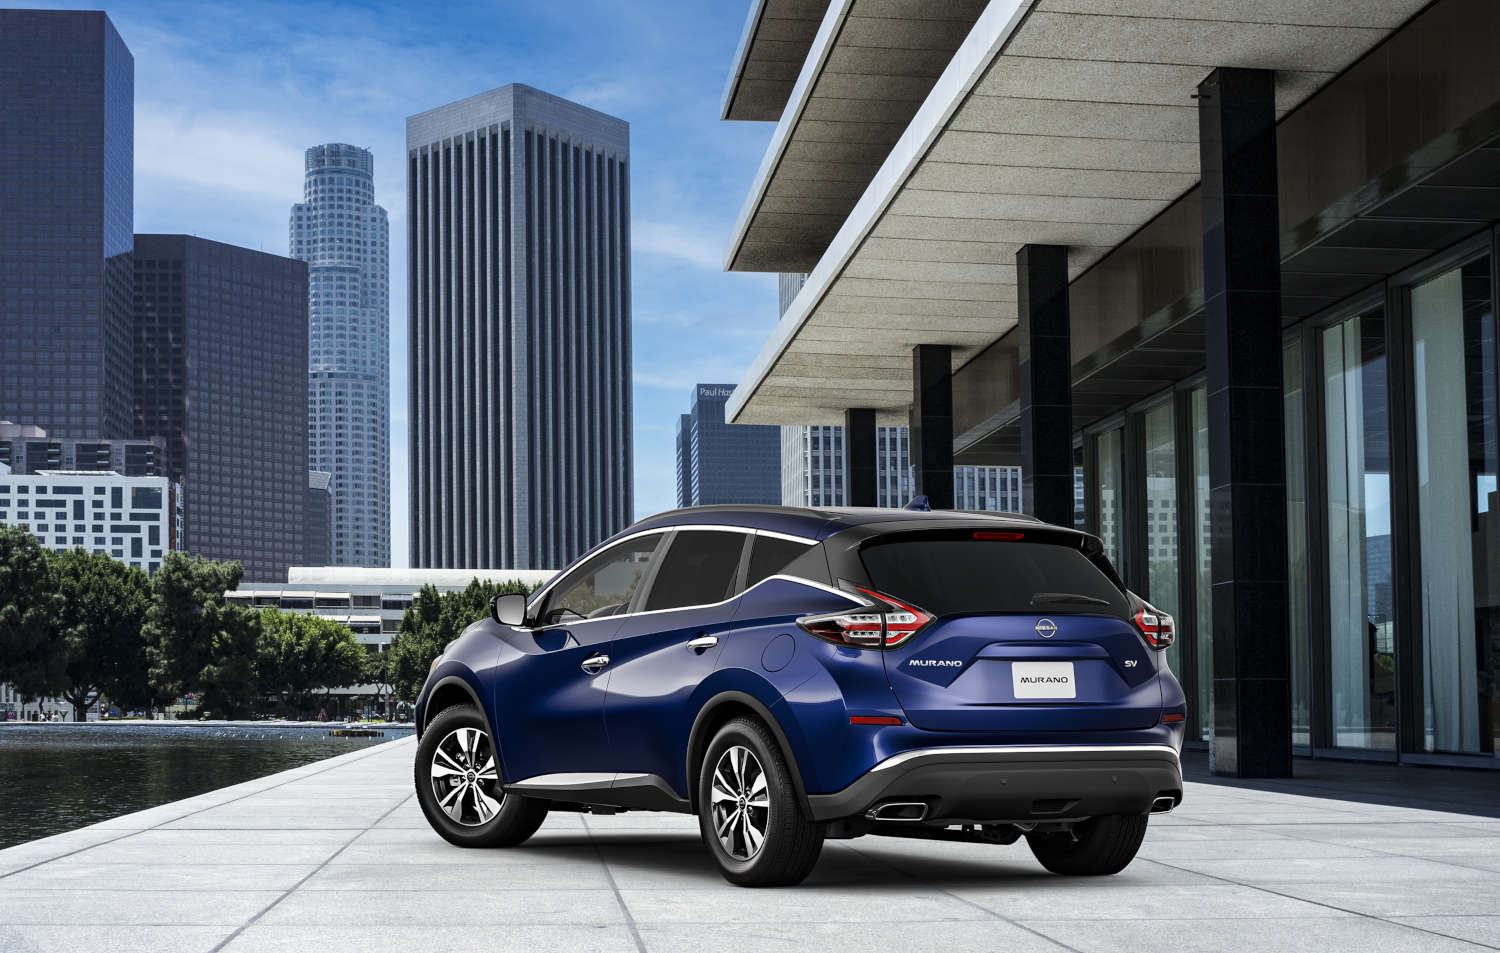 This blue Nissan Murano is one of the best SUVs for seniors 